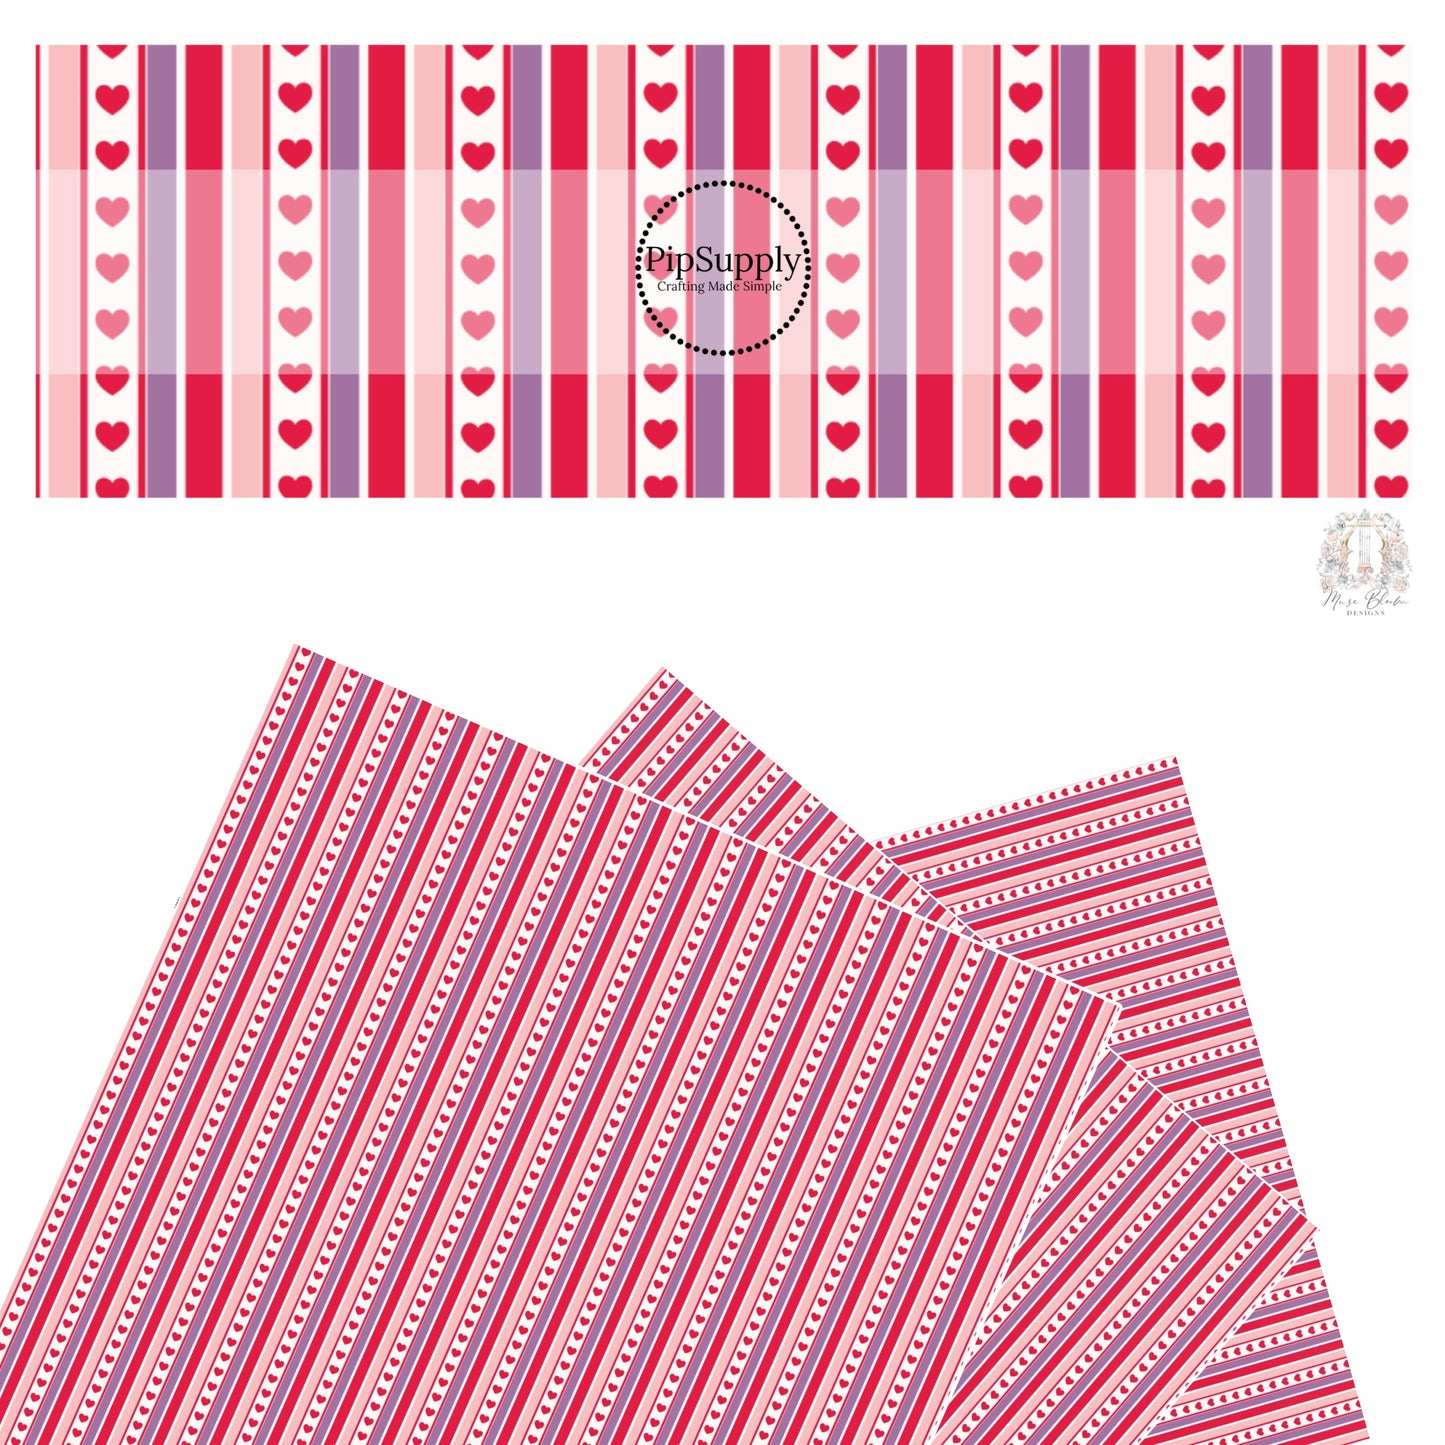 These Valentine's pattern themed faux leather sheets contain the following design elements: rows of red, purple, and pink strips with tiny red hearts on white. Our CPSIA compliant faux leather sheets or rolls can be used for all types of crafting projects.